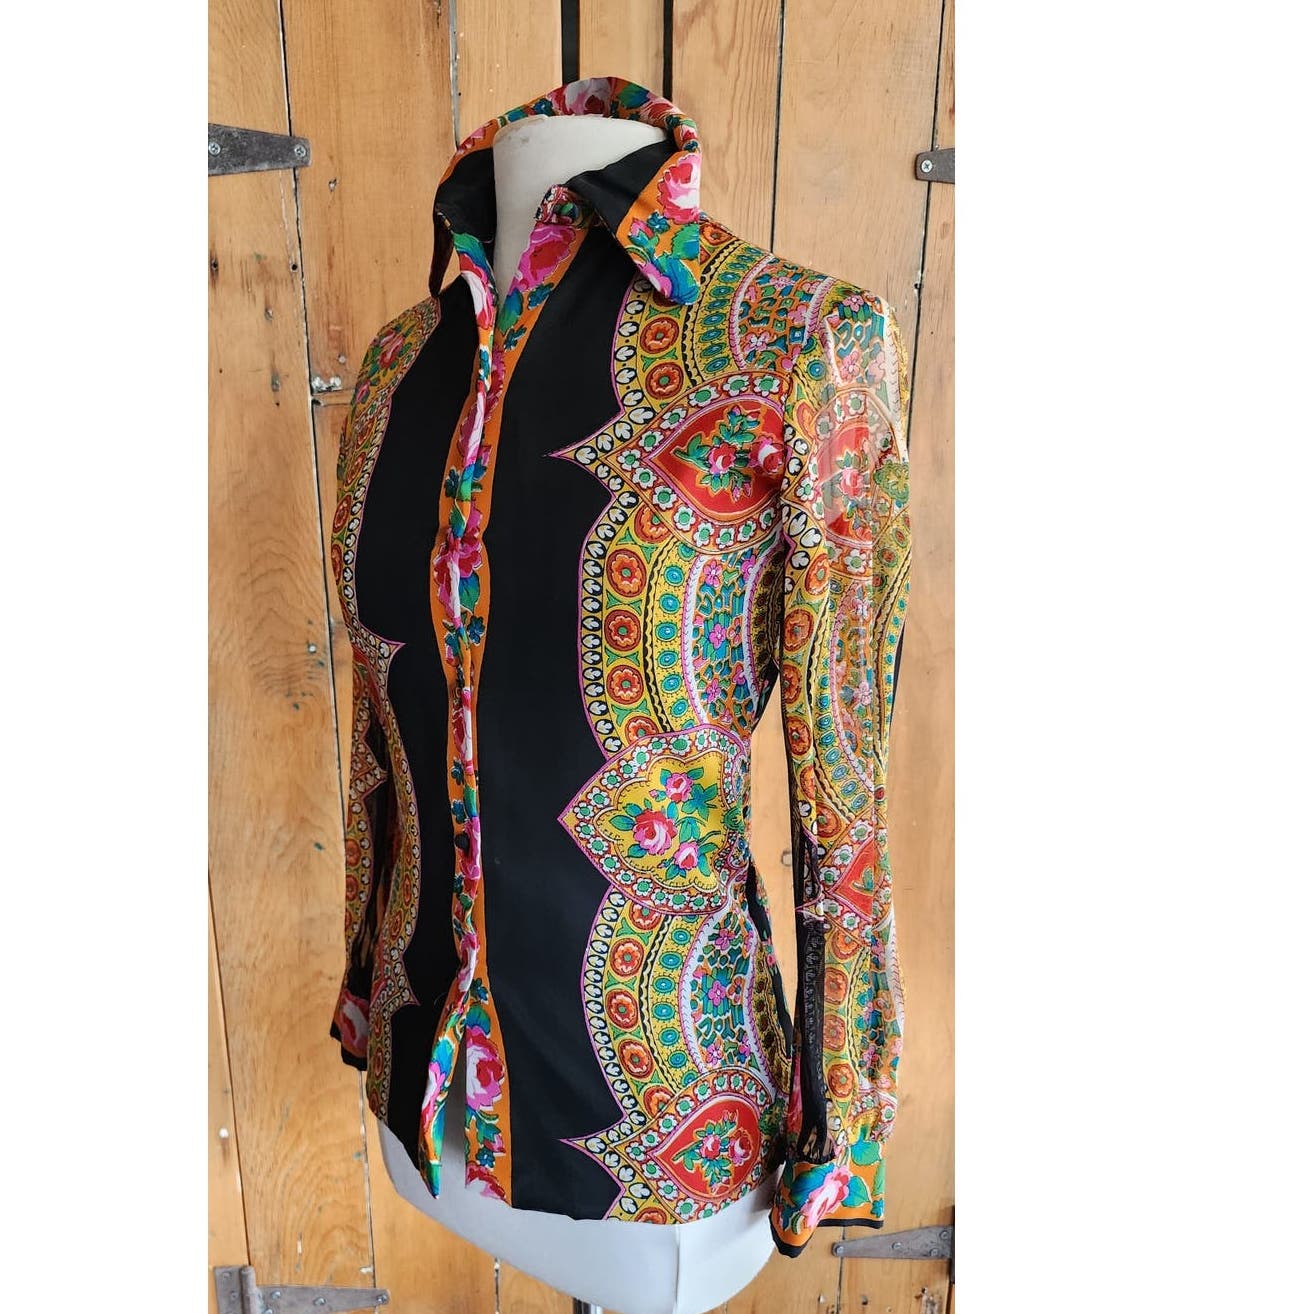 Vintage 70s Psychedelic Blouse Black Gold Button Down Baroque Print